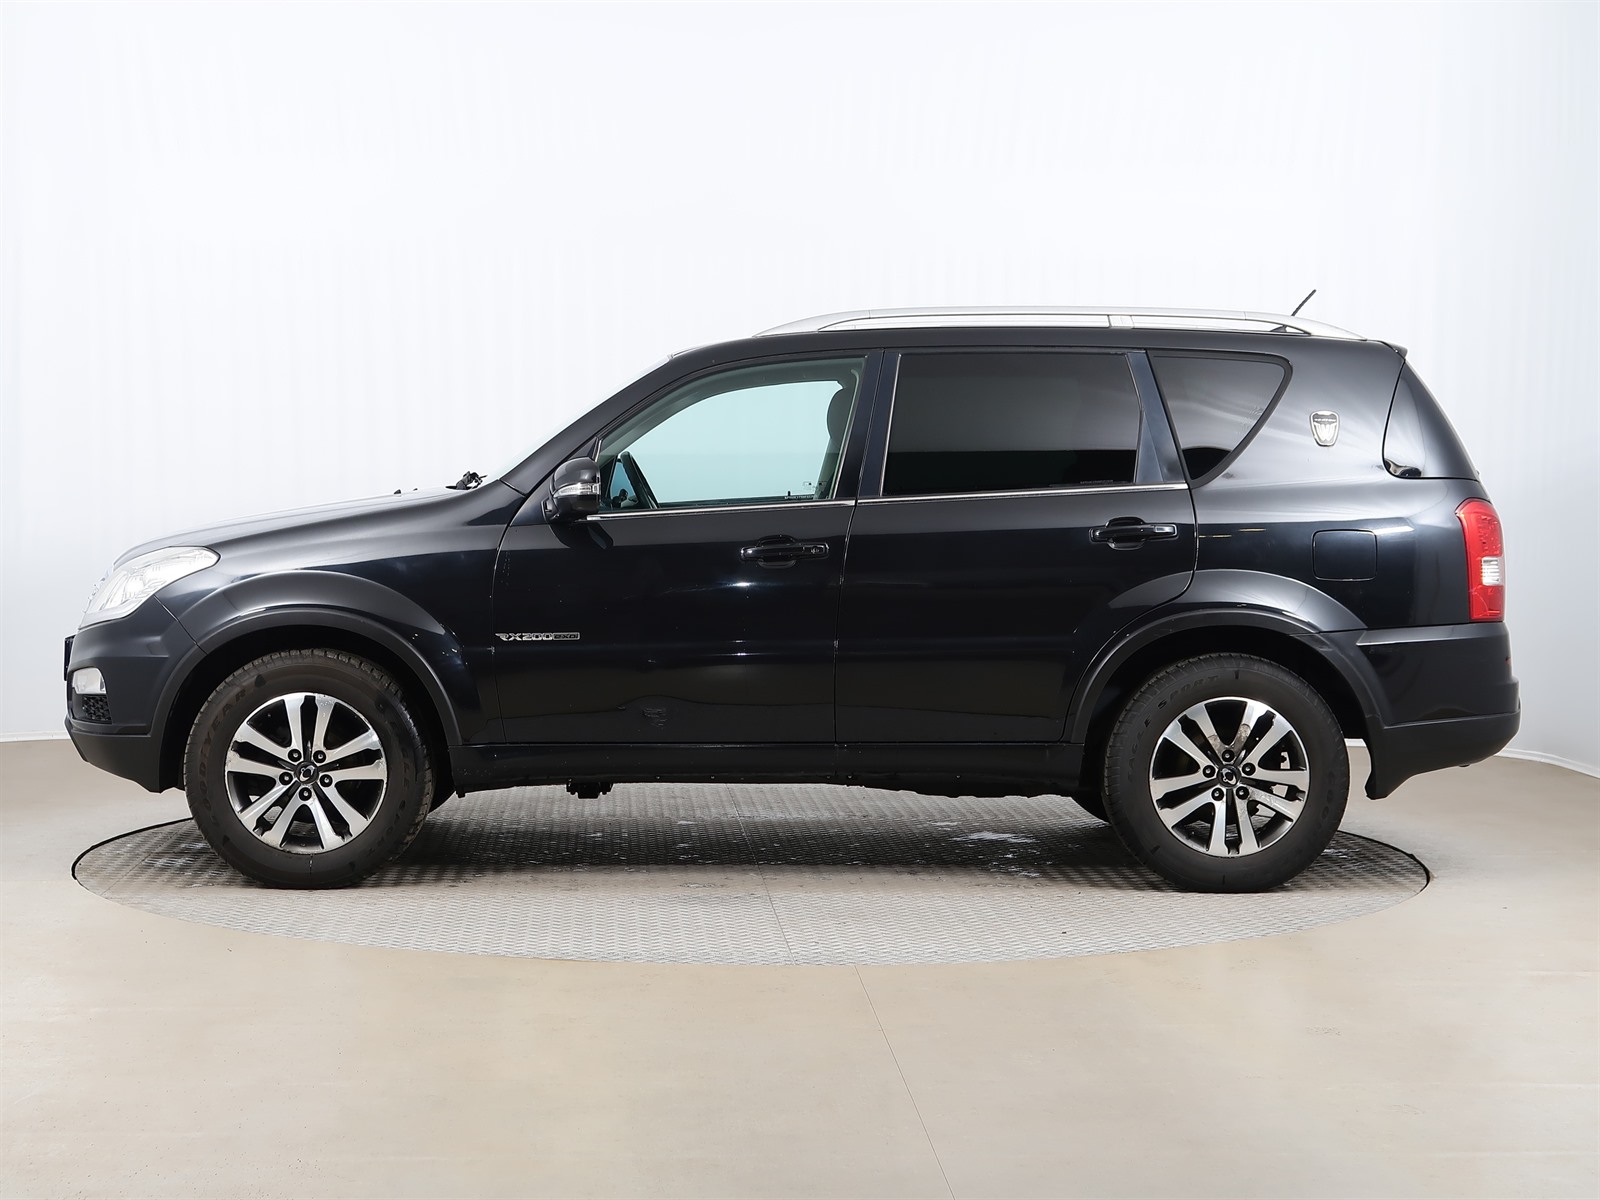 SsangYong Rexton, 2014 - pohled č. 4